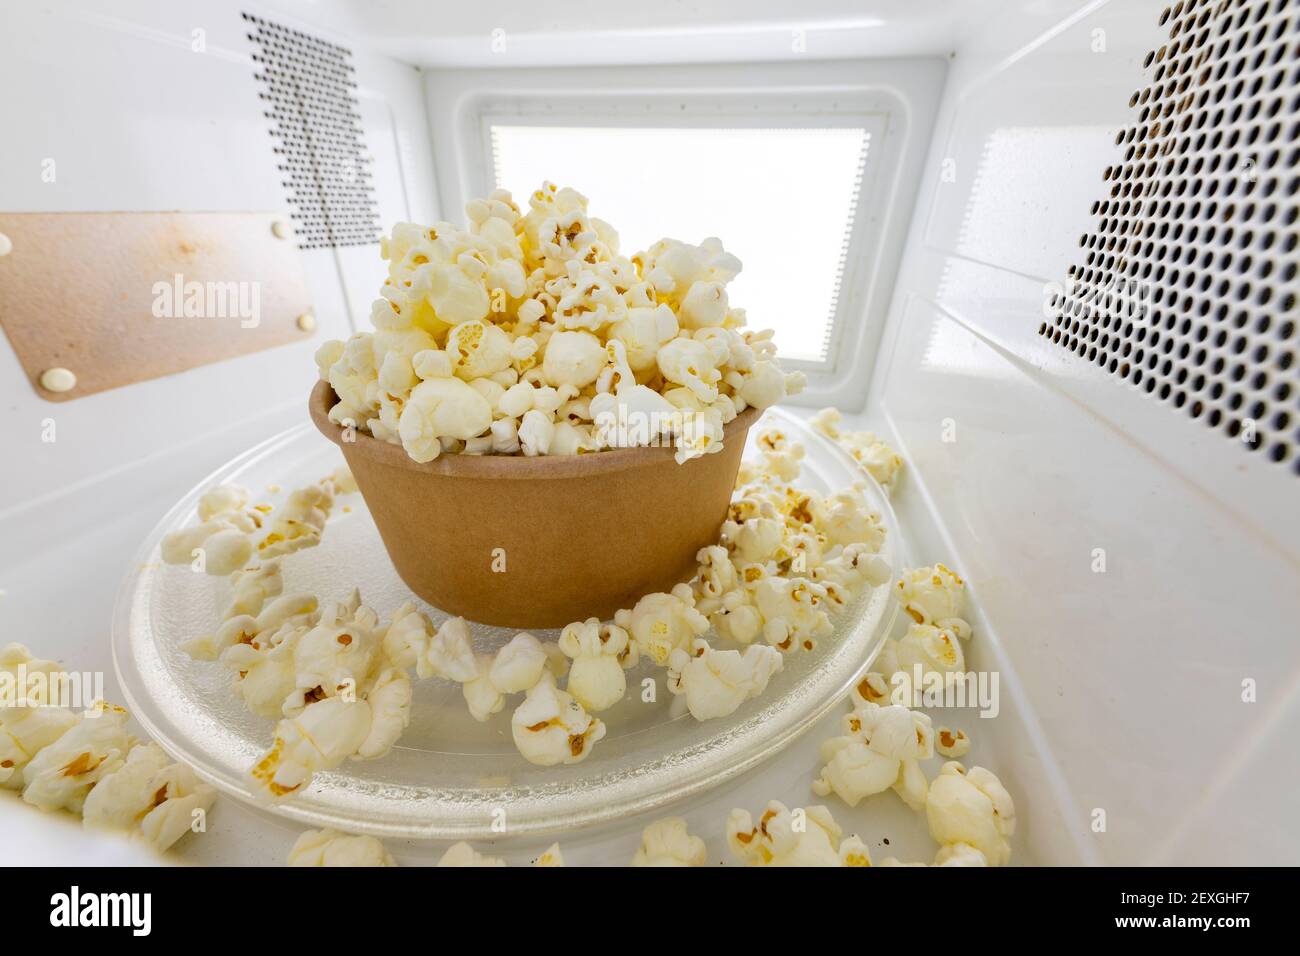 Spilled popcorn in the microwave. Salty snack prepared in the kitchen appliance. Light background. Stock Photo